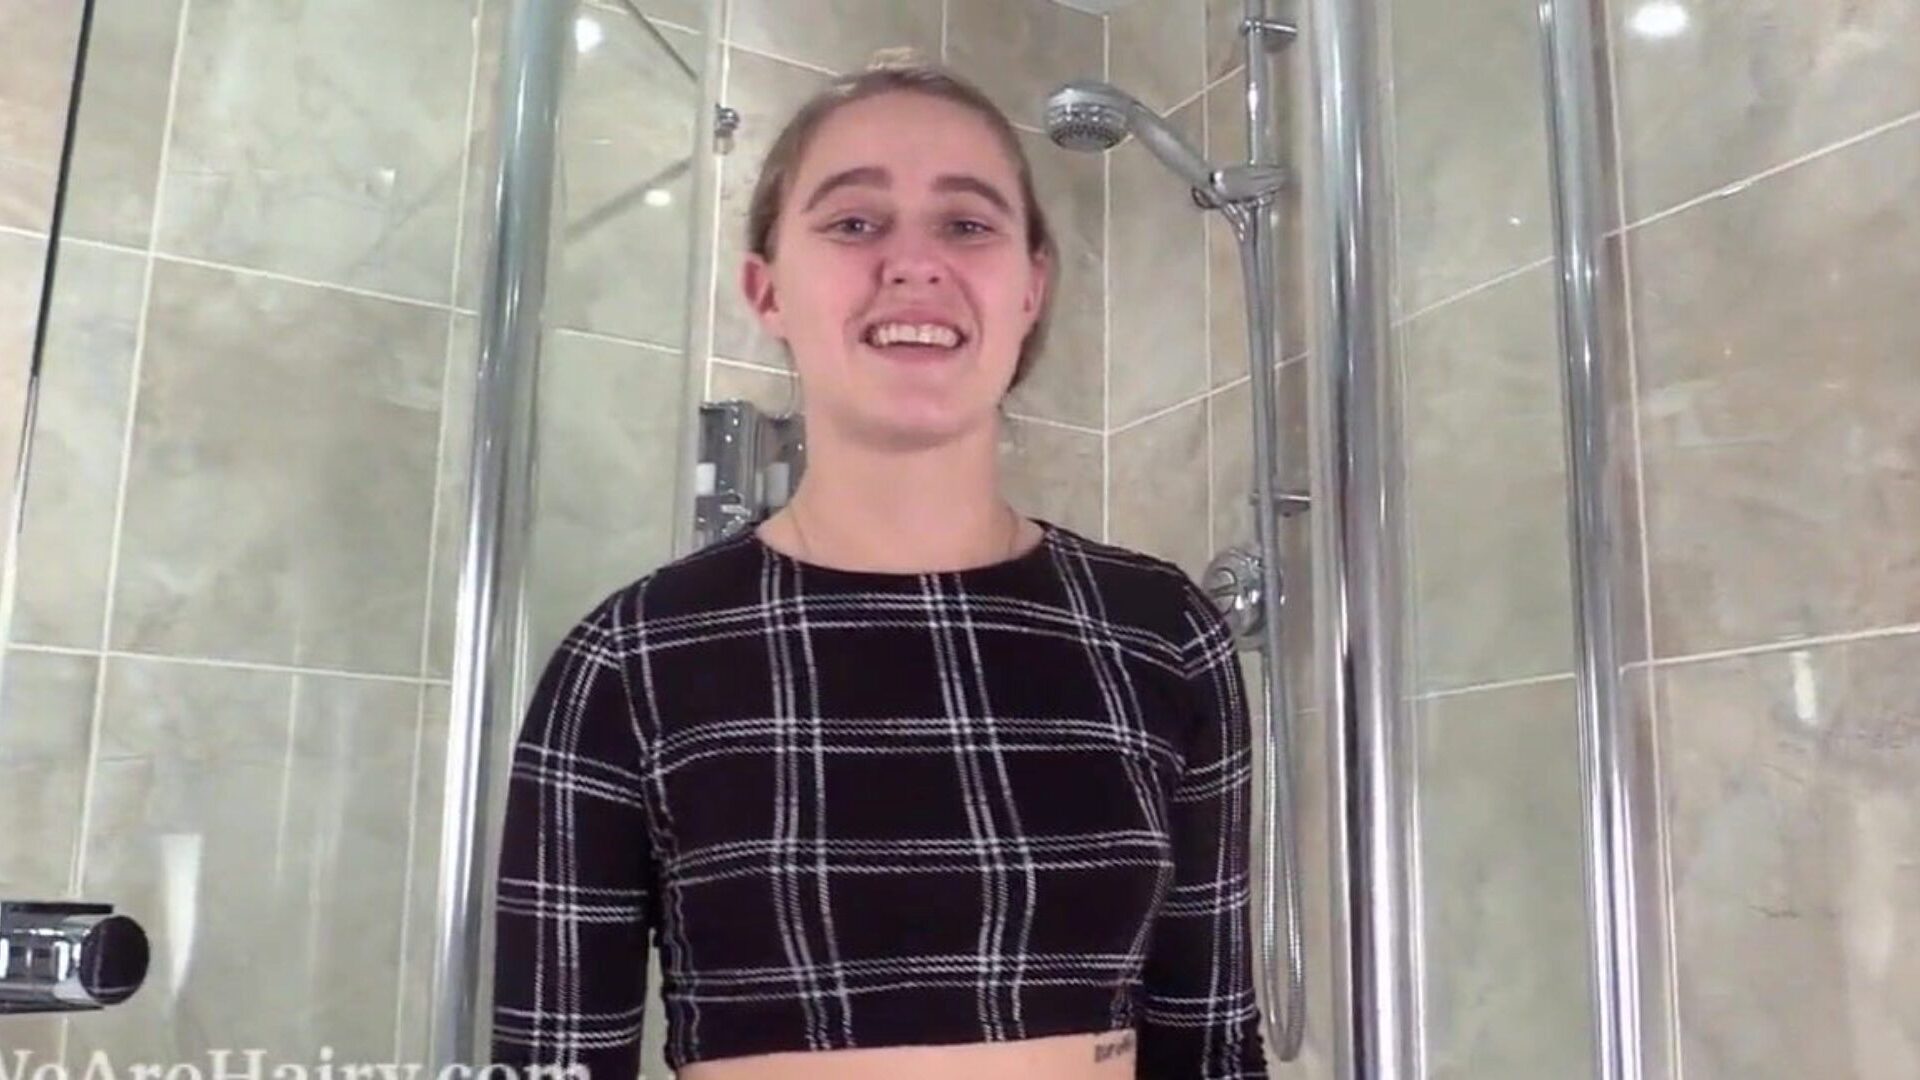 Bubsy Lou luvs a nice-looking wet shower Bubsy Lou poses by her glass bathroom in her afro top and denim shorts She wets down her figure including her very hirsute pits and slit She finds a spot to get her bus wetting wet and is outstanding to see